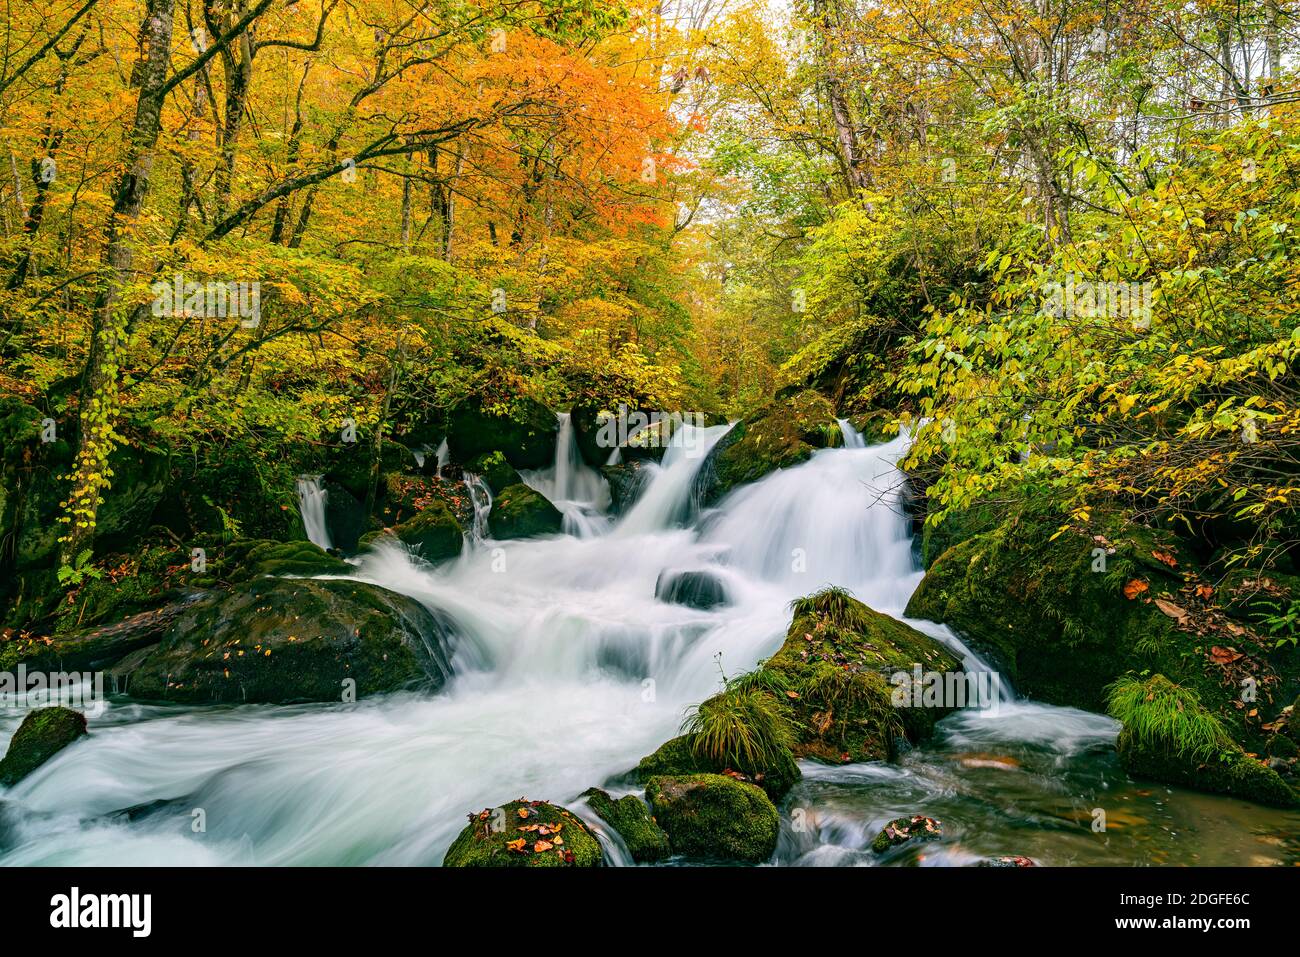 Waterfalls in the Oirase Mountain Stream in colorful foliage of autumn forest Stock Photo